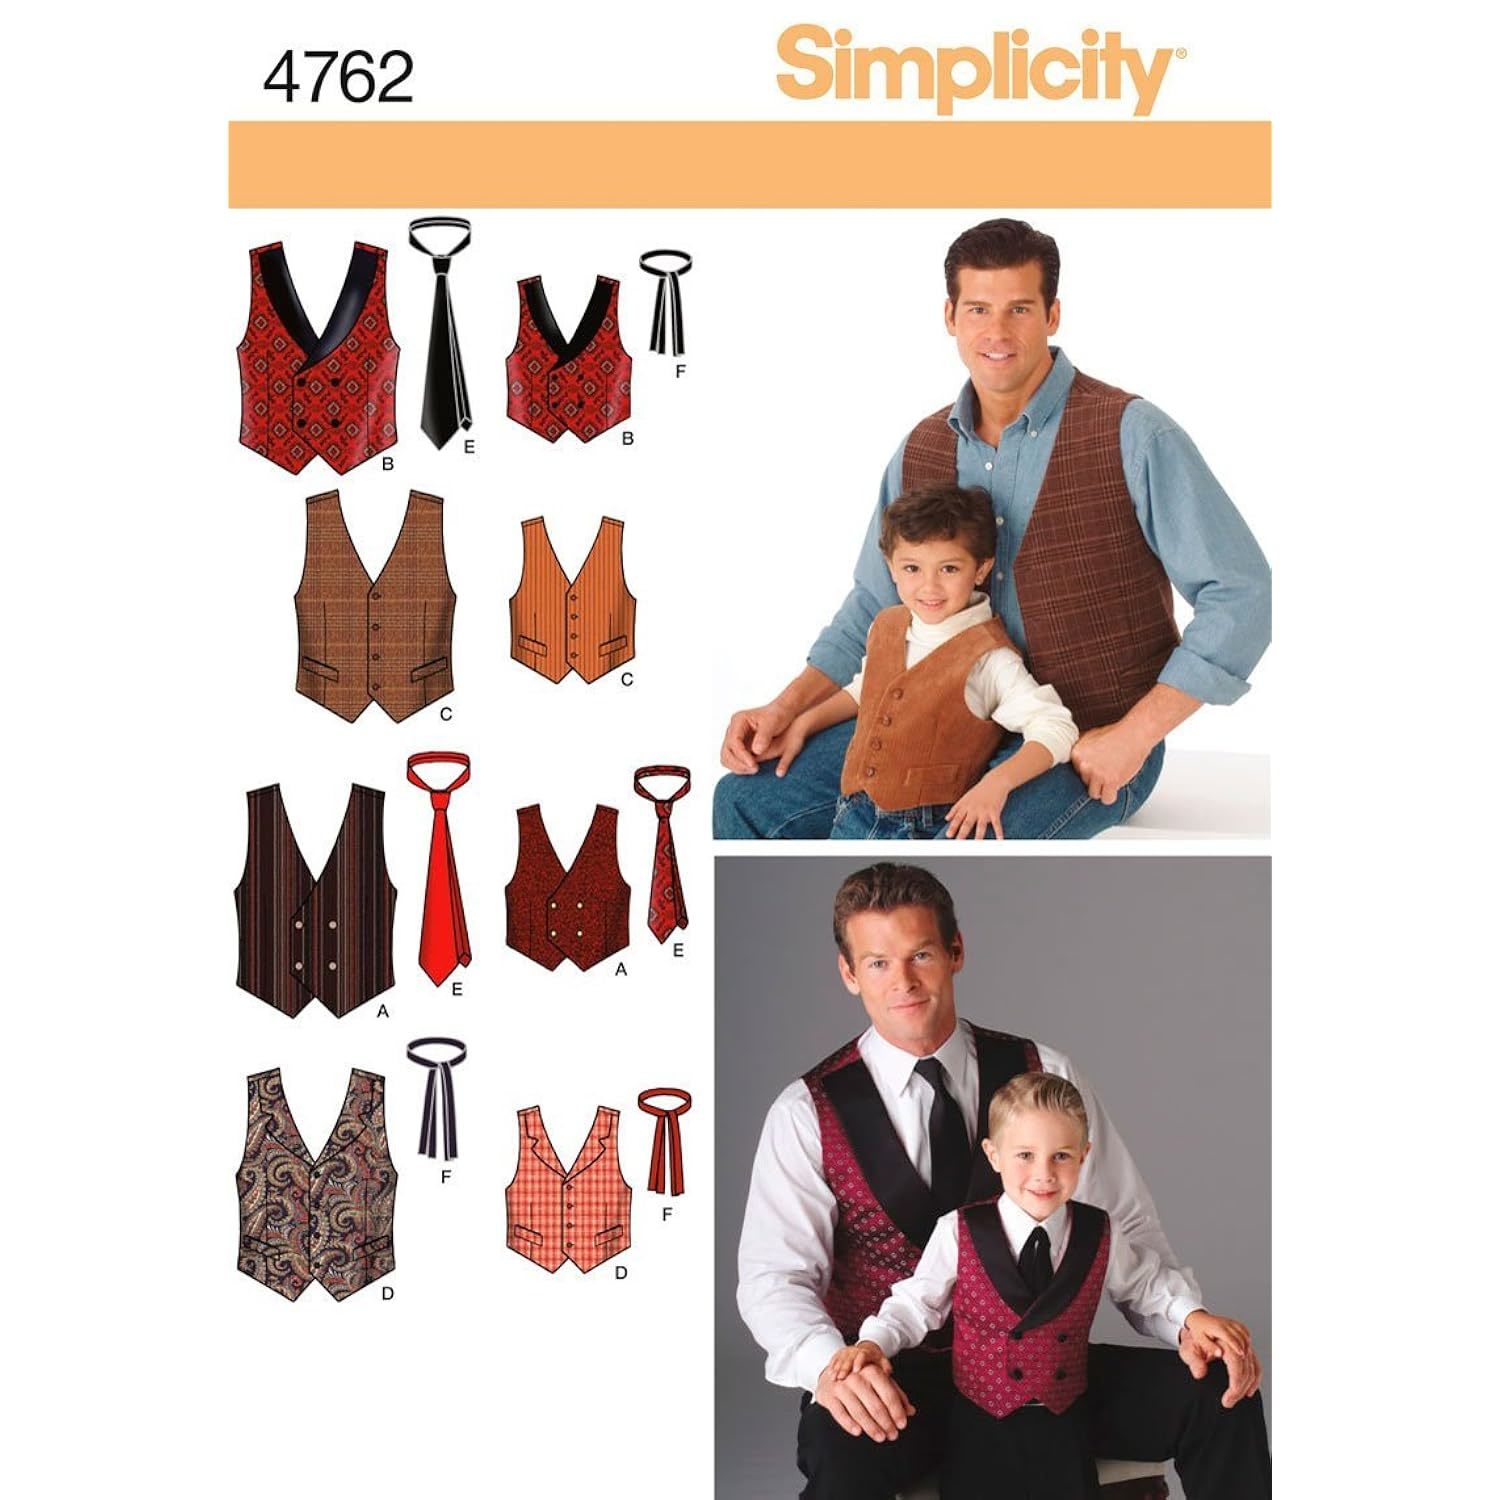 Primary image for Simplicity 4762 Vest and Tie Sewing Pattern for Men and Boys, Size A (S-XL)